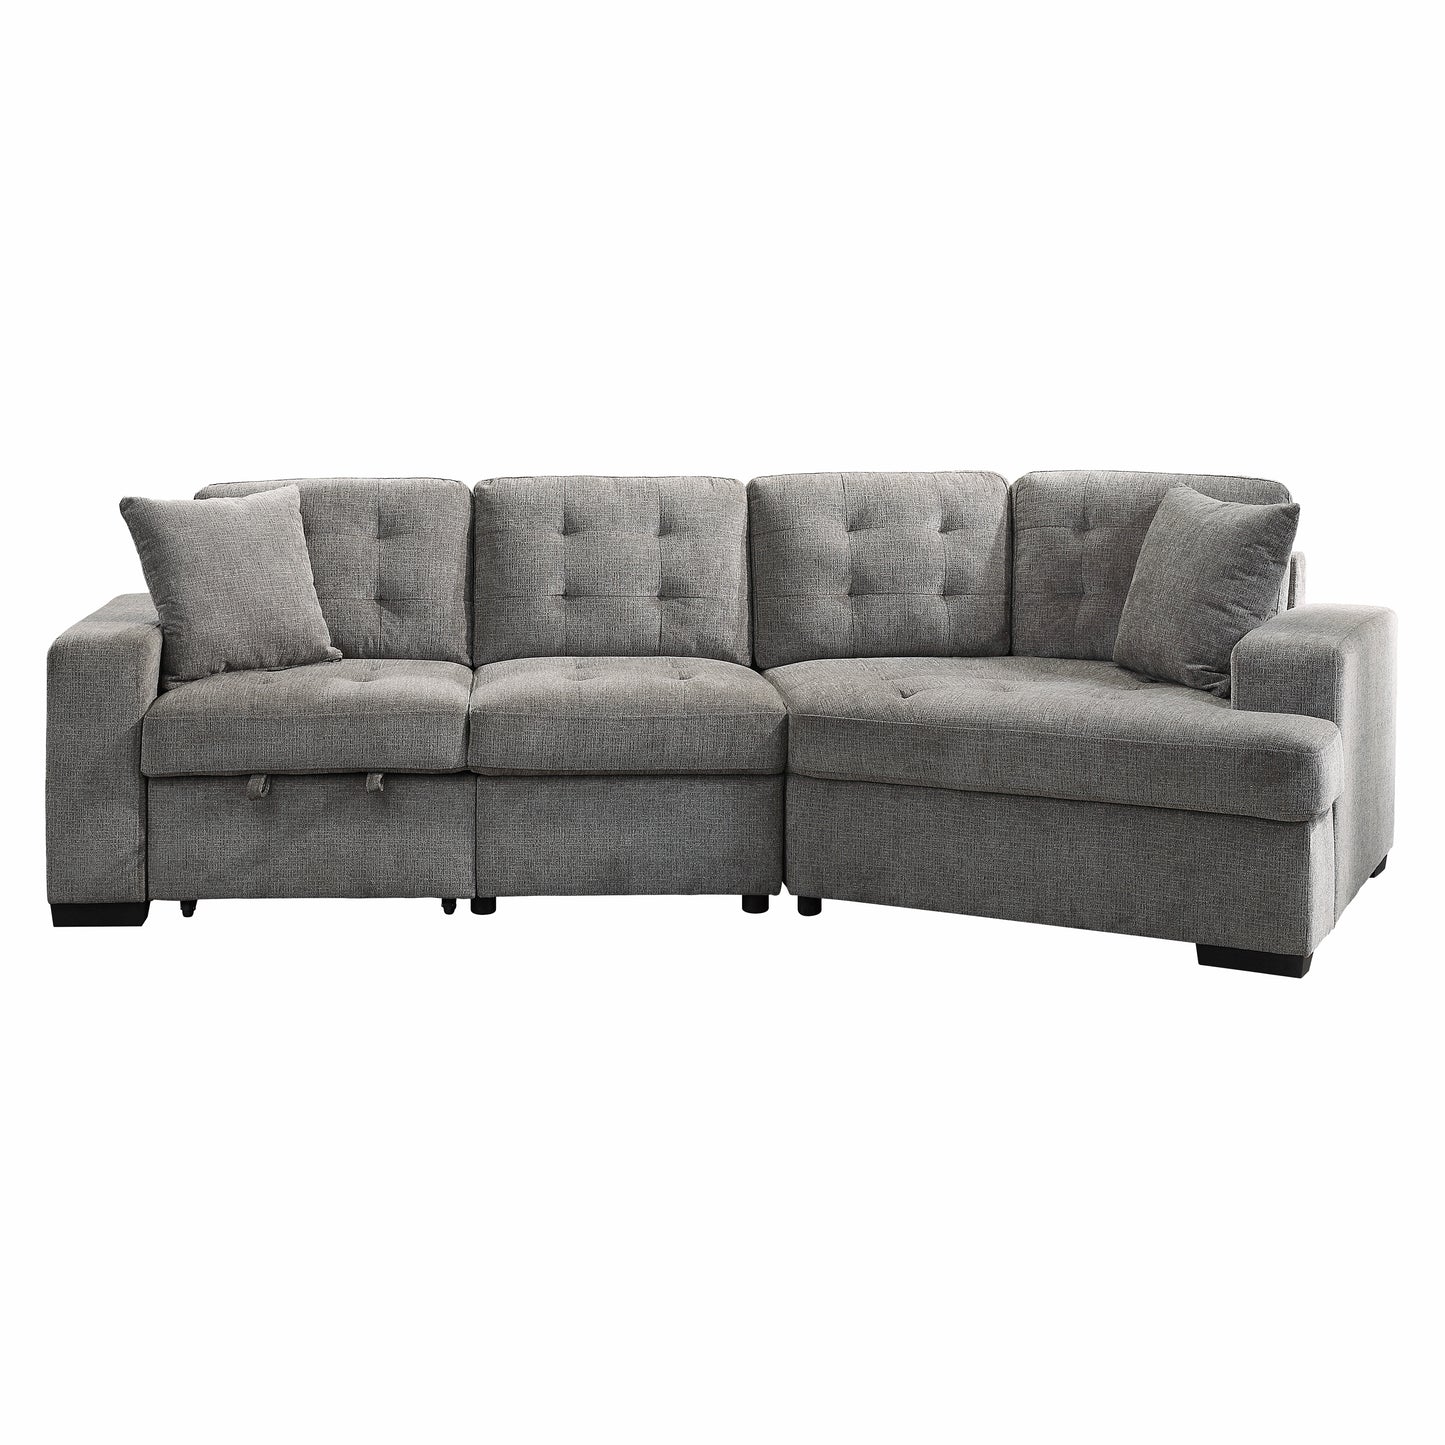 Logansport 2-Piece Sectional with Pull-out Ottoman GREY